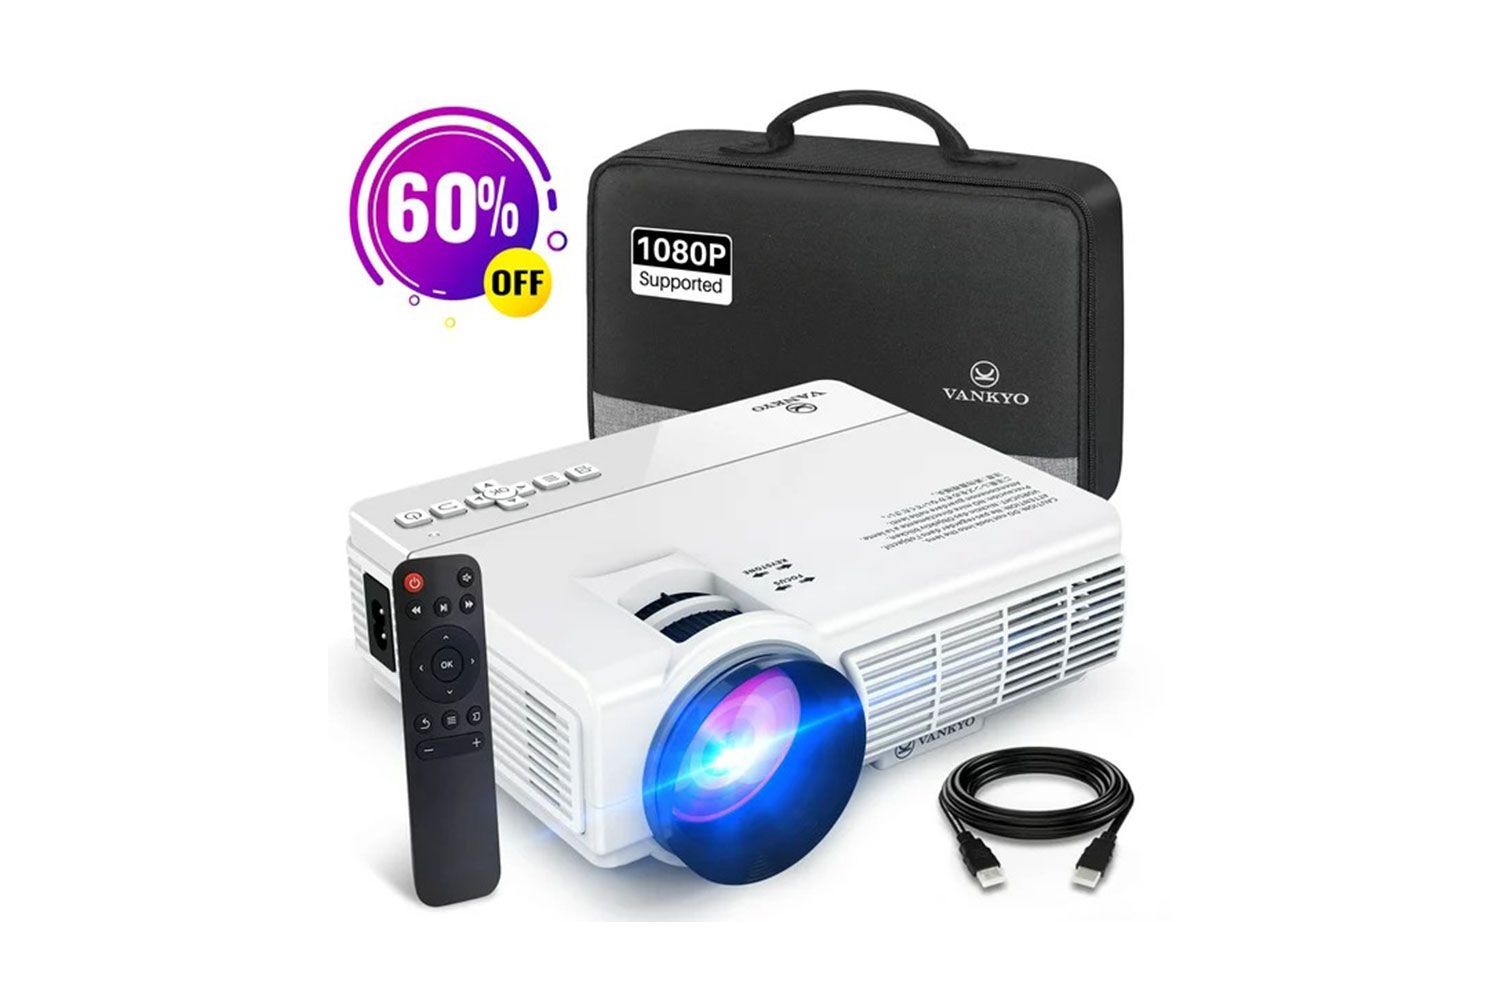 Best Budget Projector for Presentations